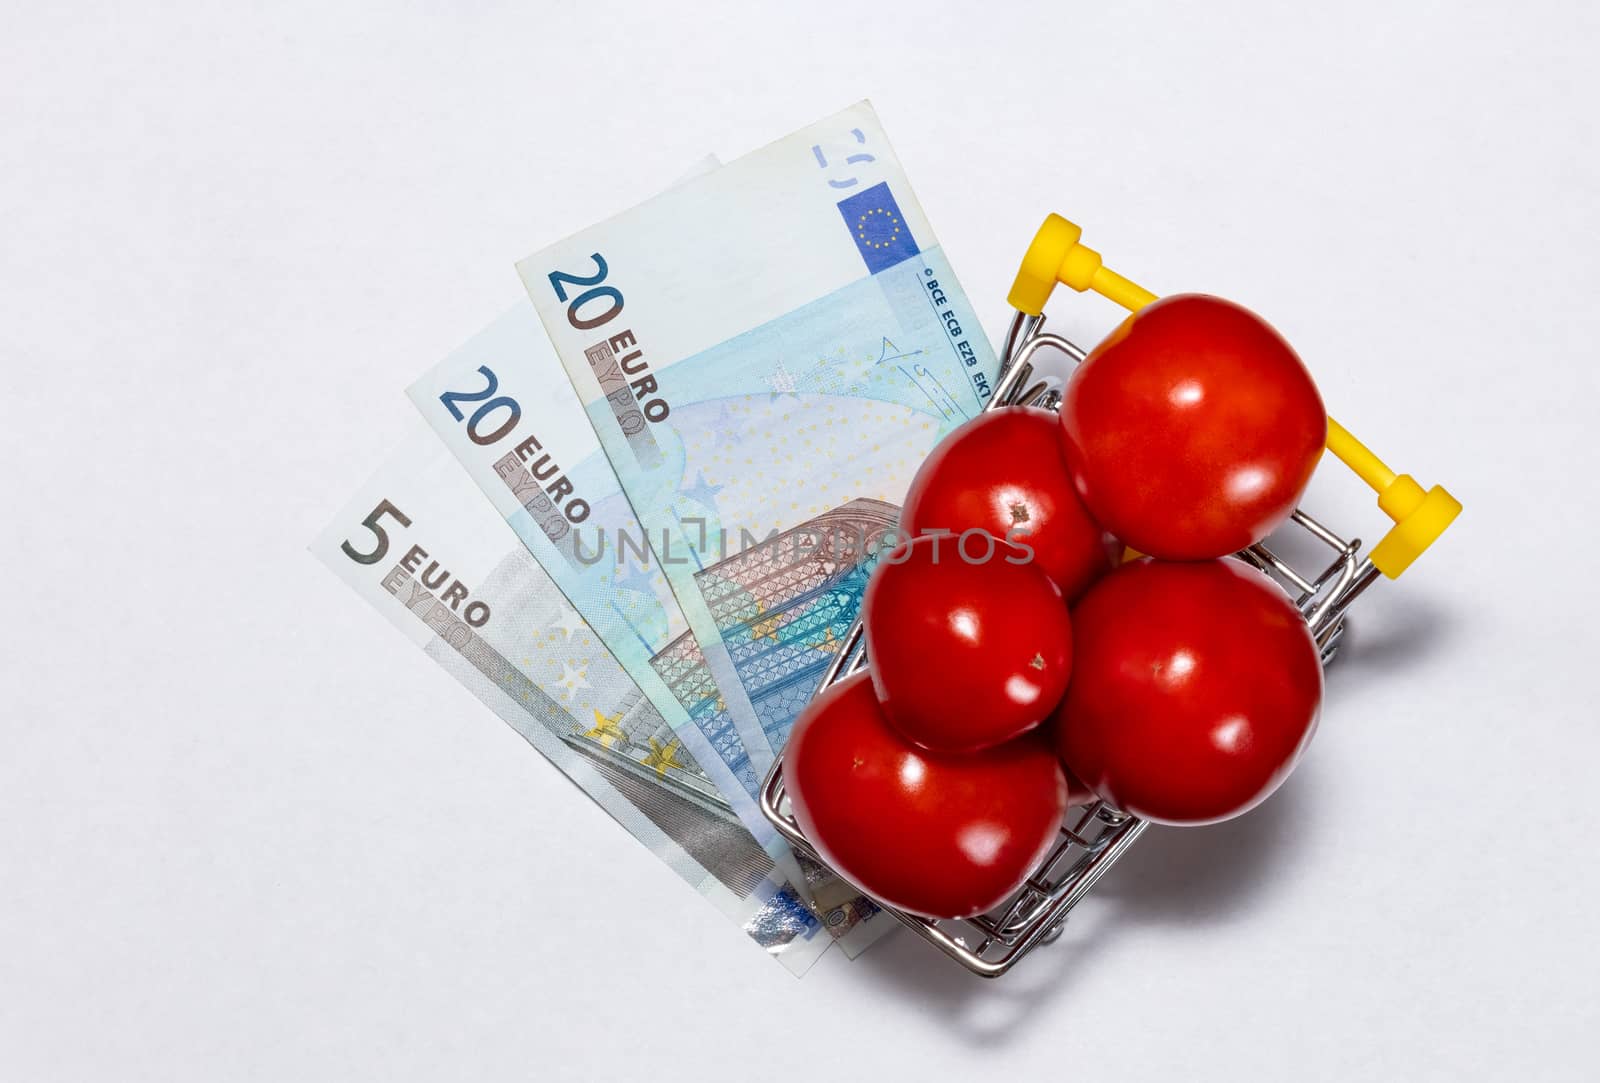 Shot of tomatoes in shopping cart isolated on white background with euro bills under it. Ripe tasty red tomatos in shopping cart. Top view. by DamantisZ